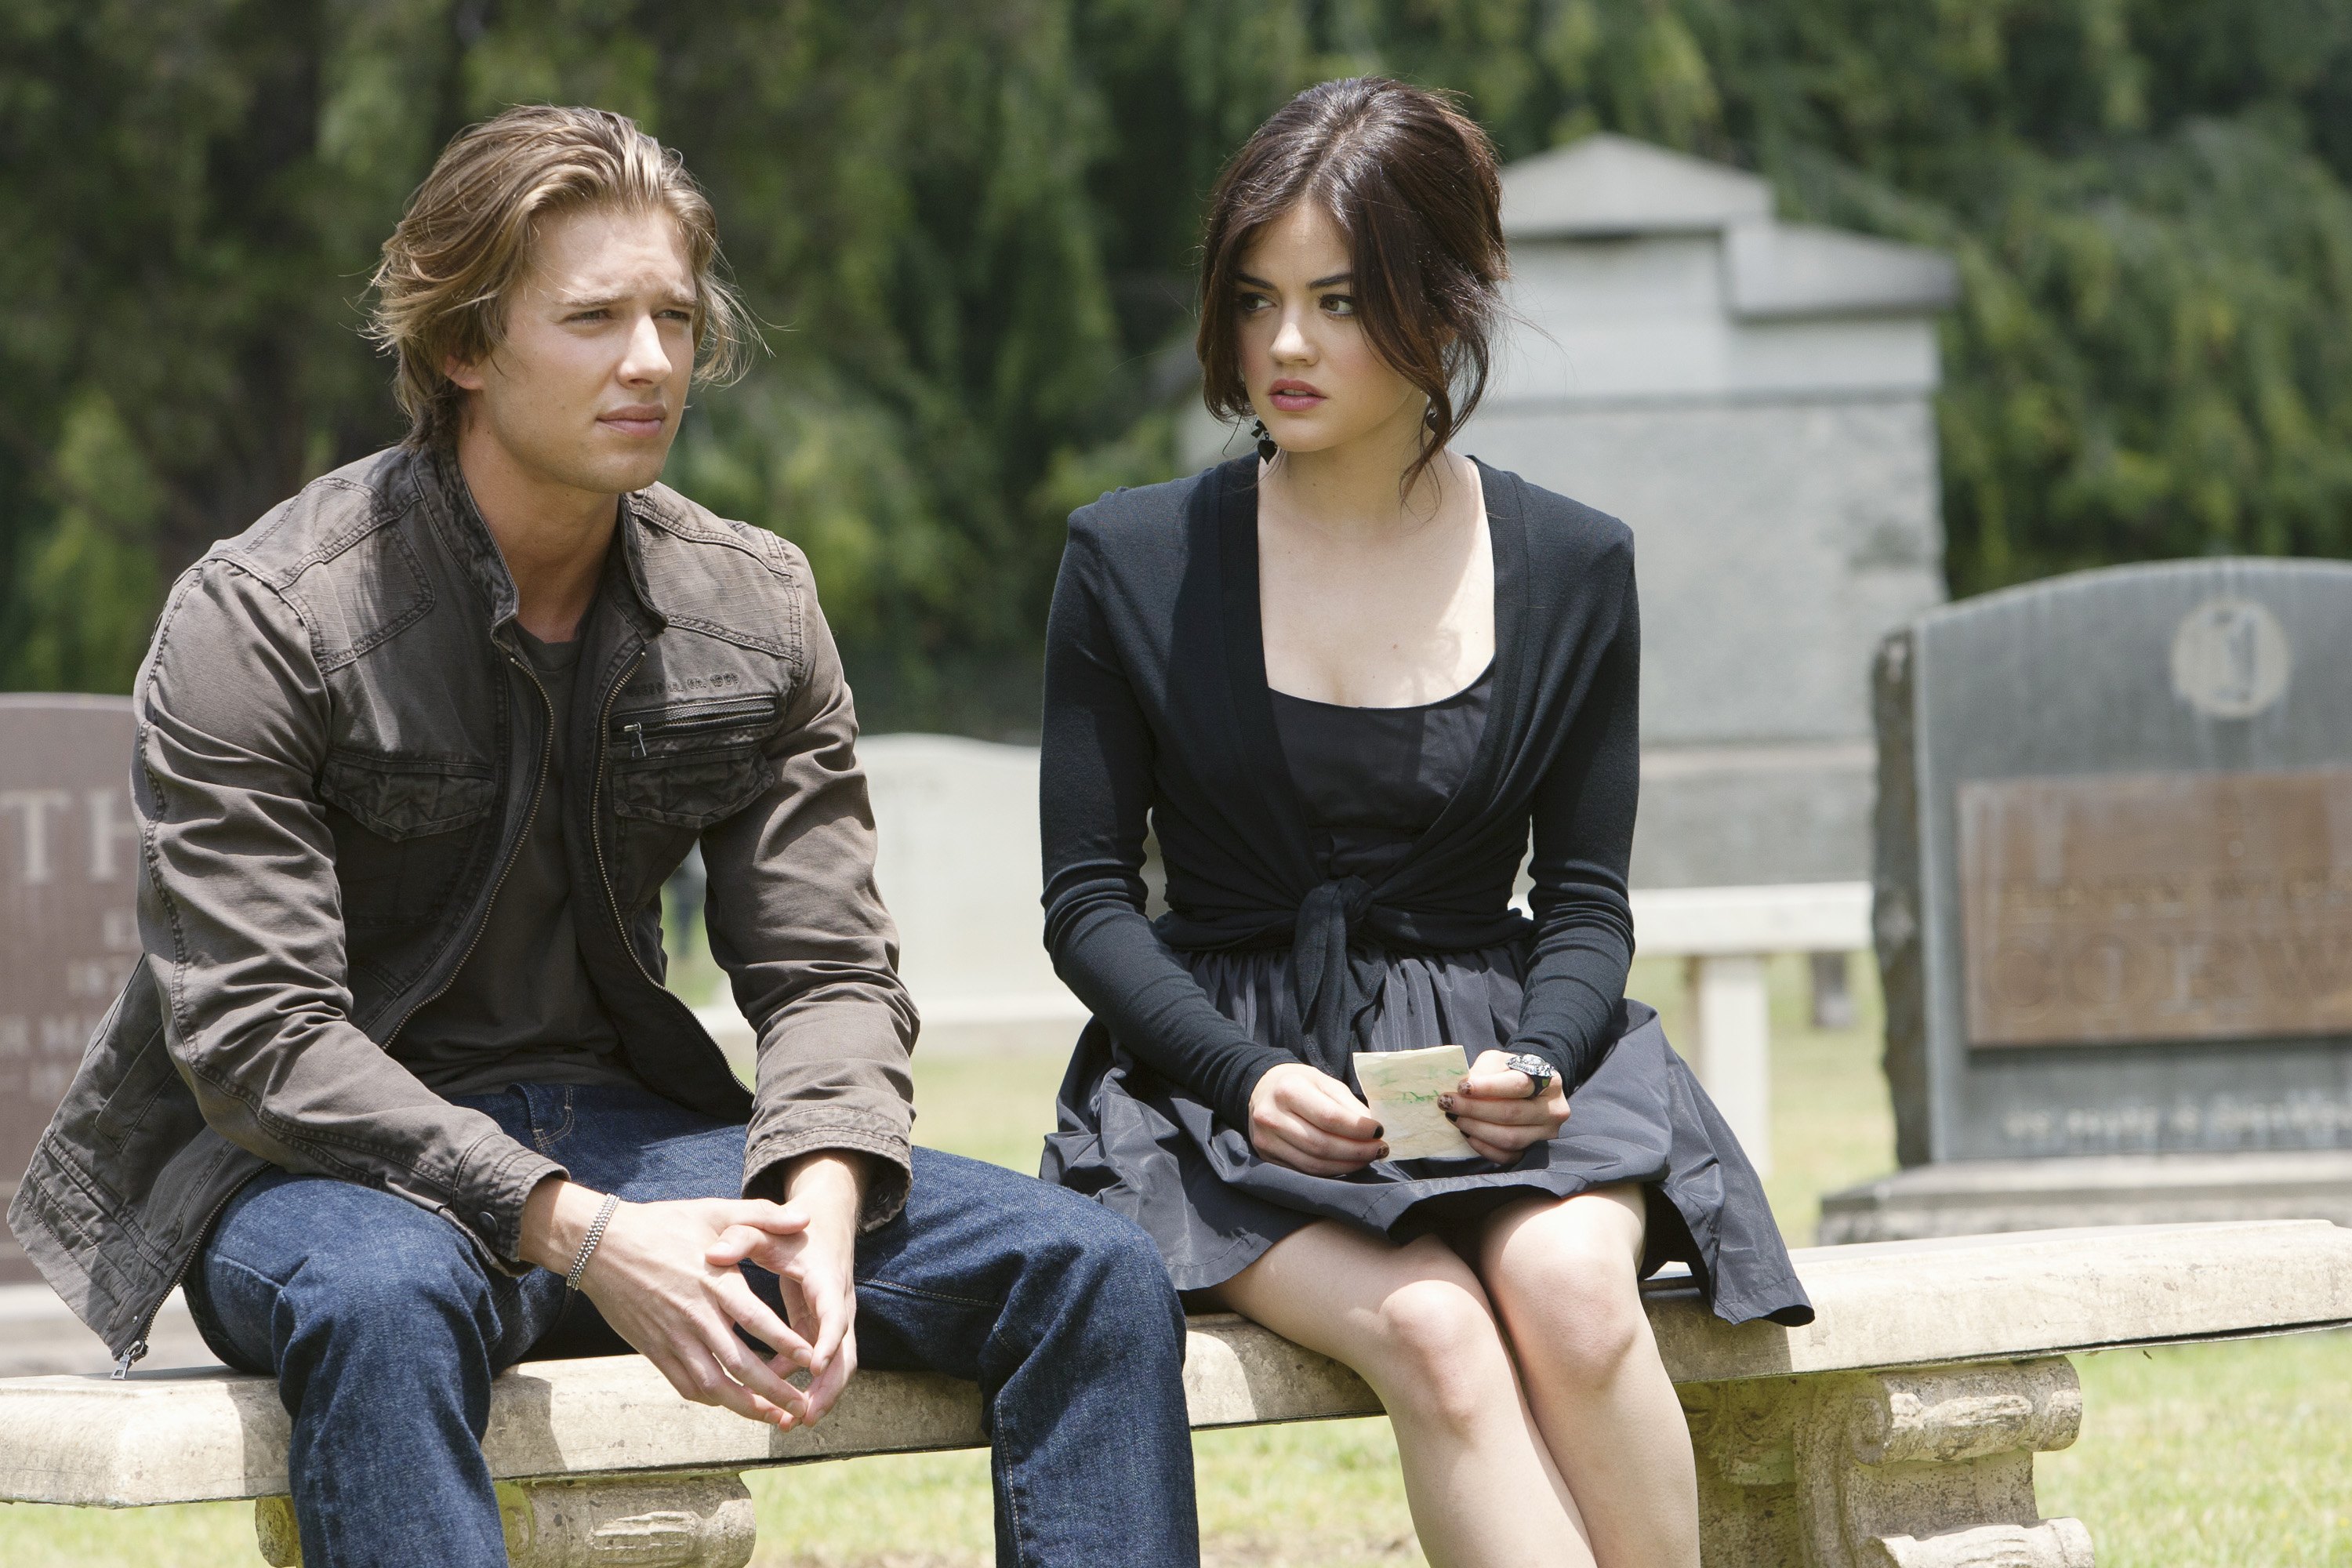 Drew Van Acker and Lucy Hale in a still from a season two episode of Pretty Little Liars